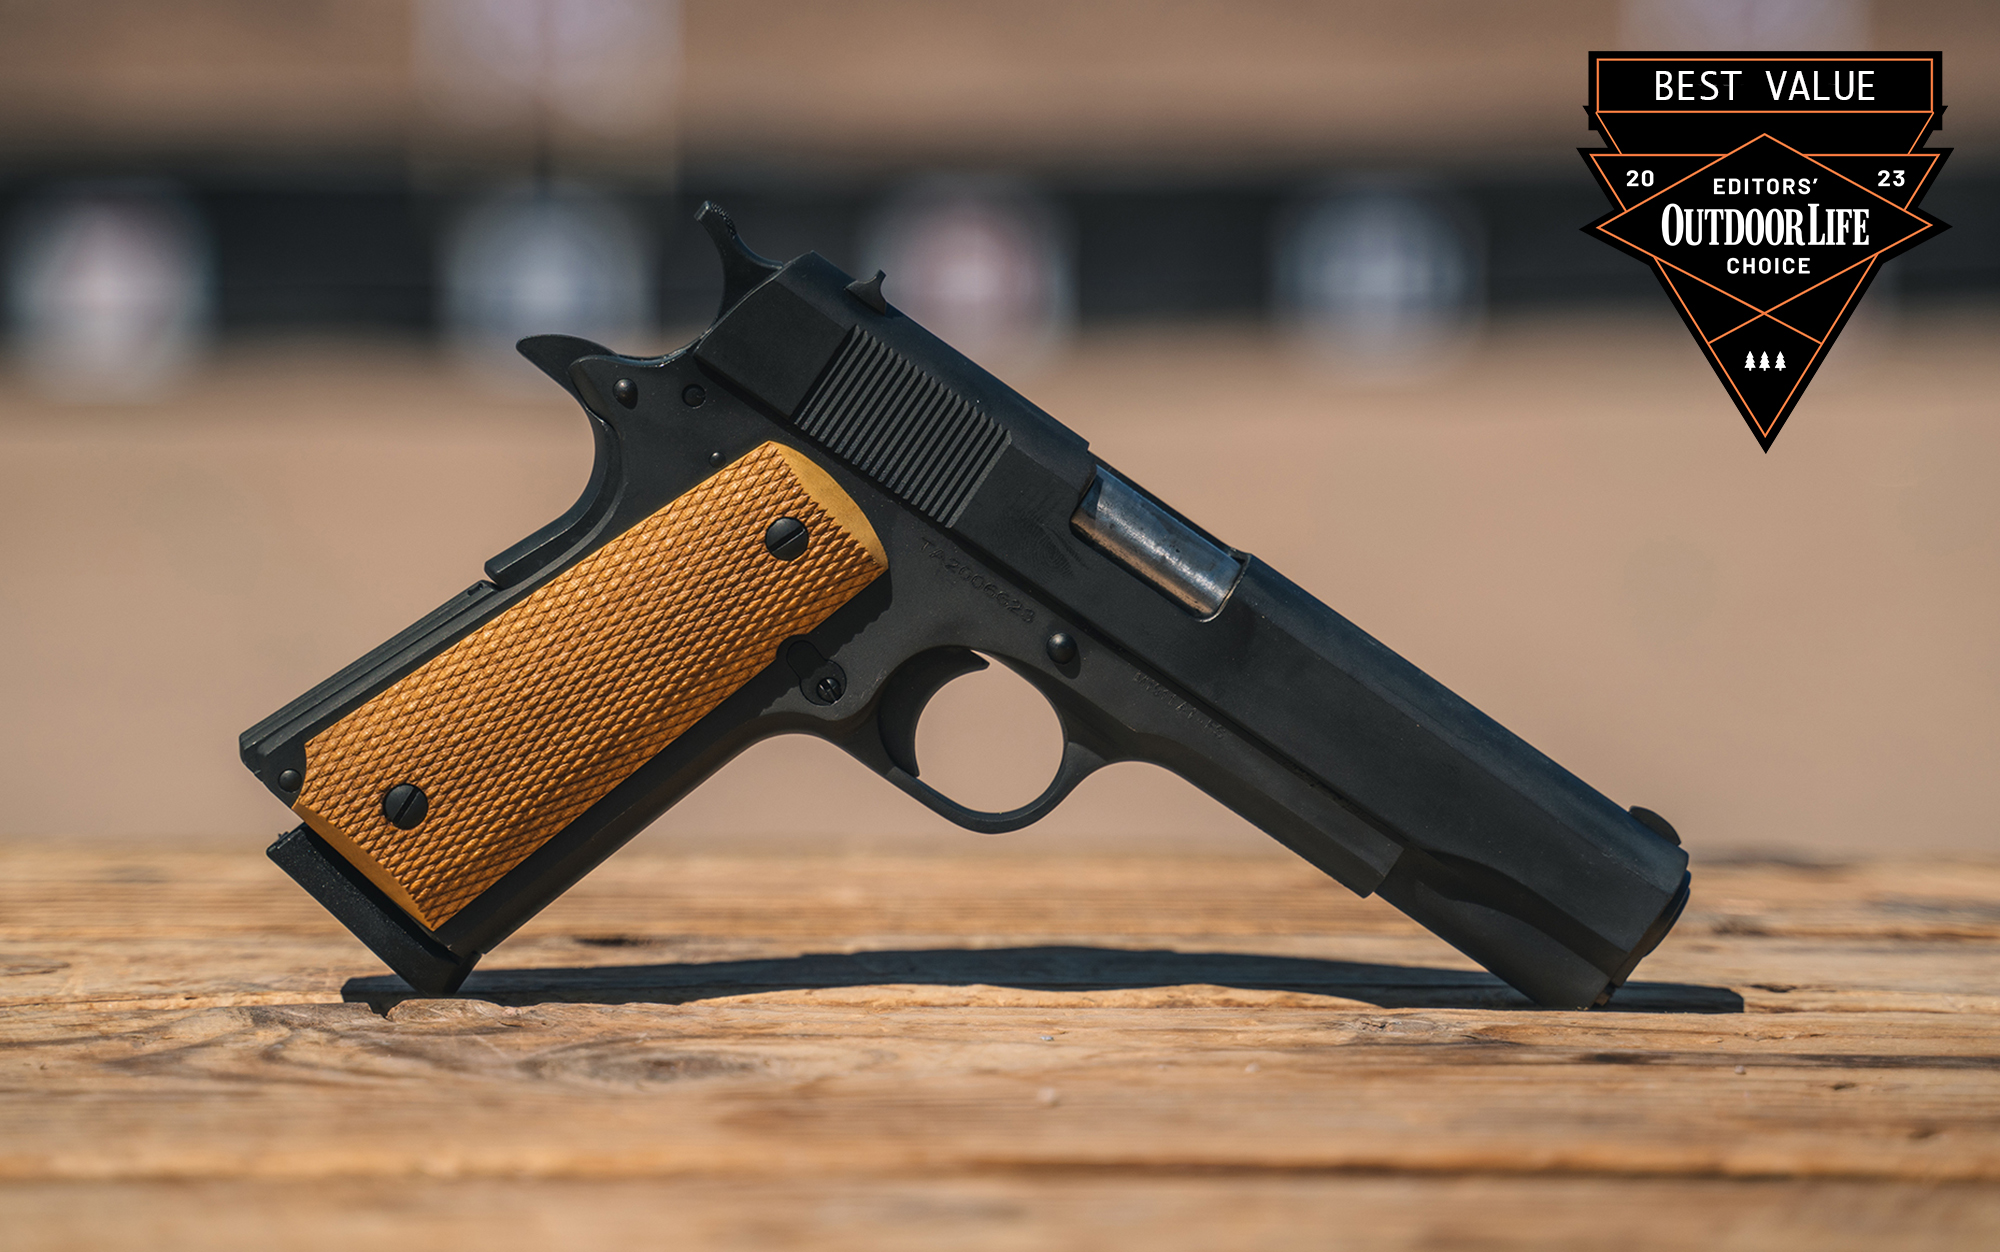 This is the best value 1911.